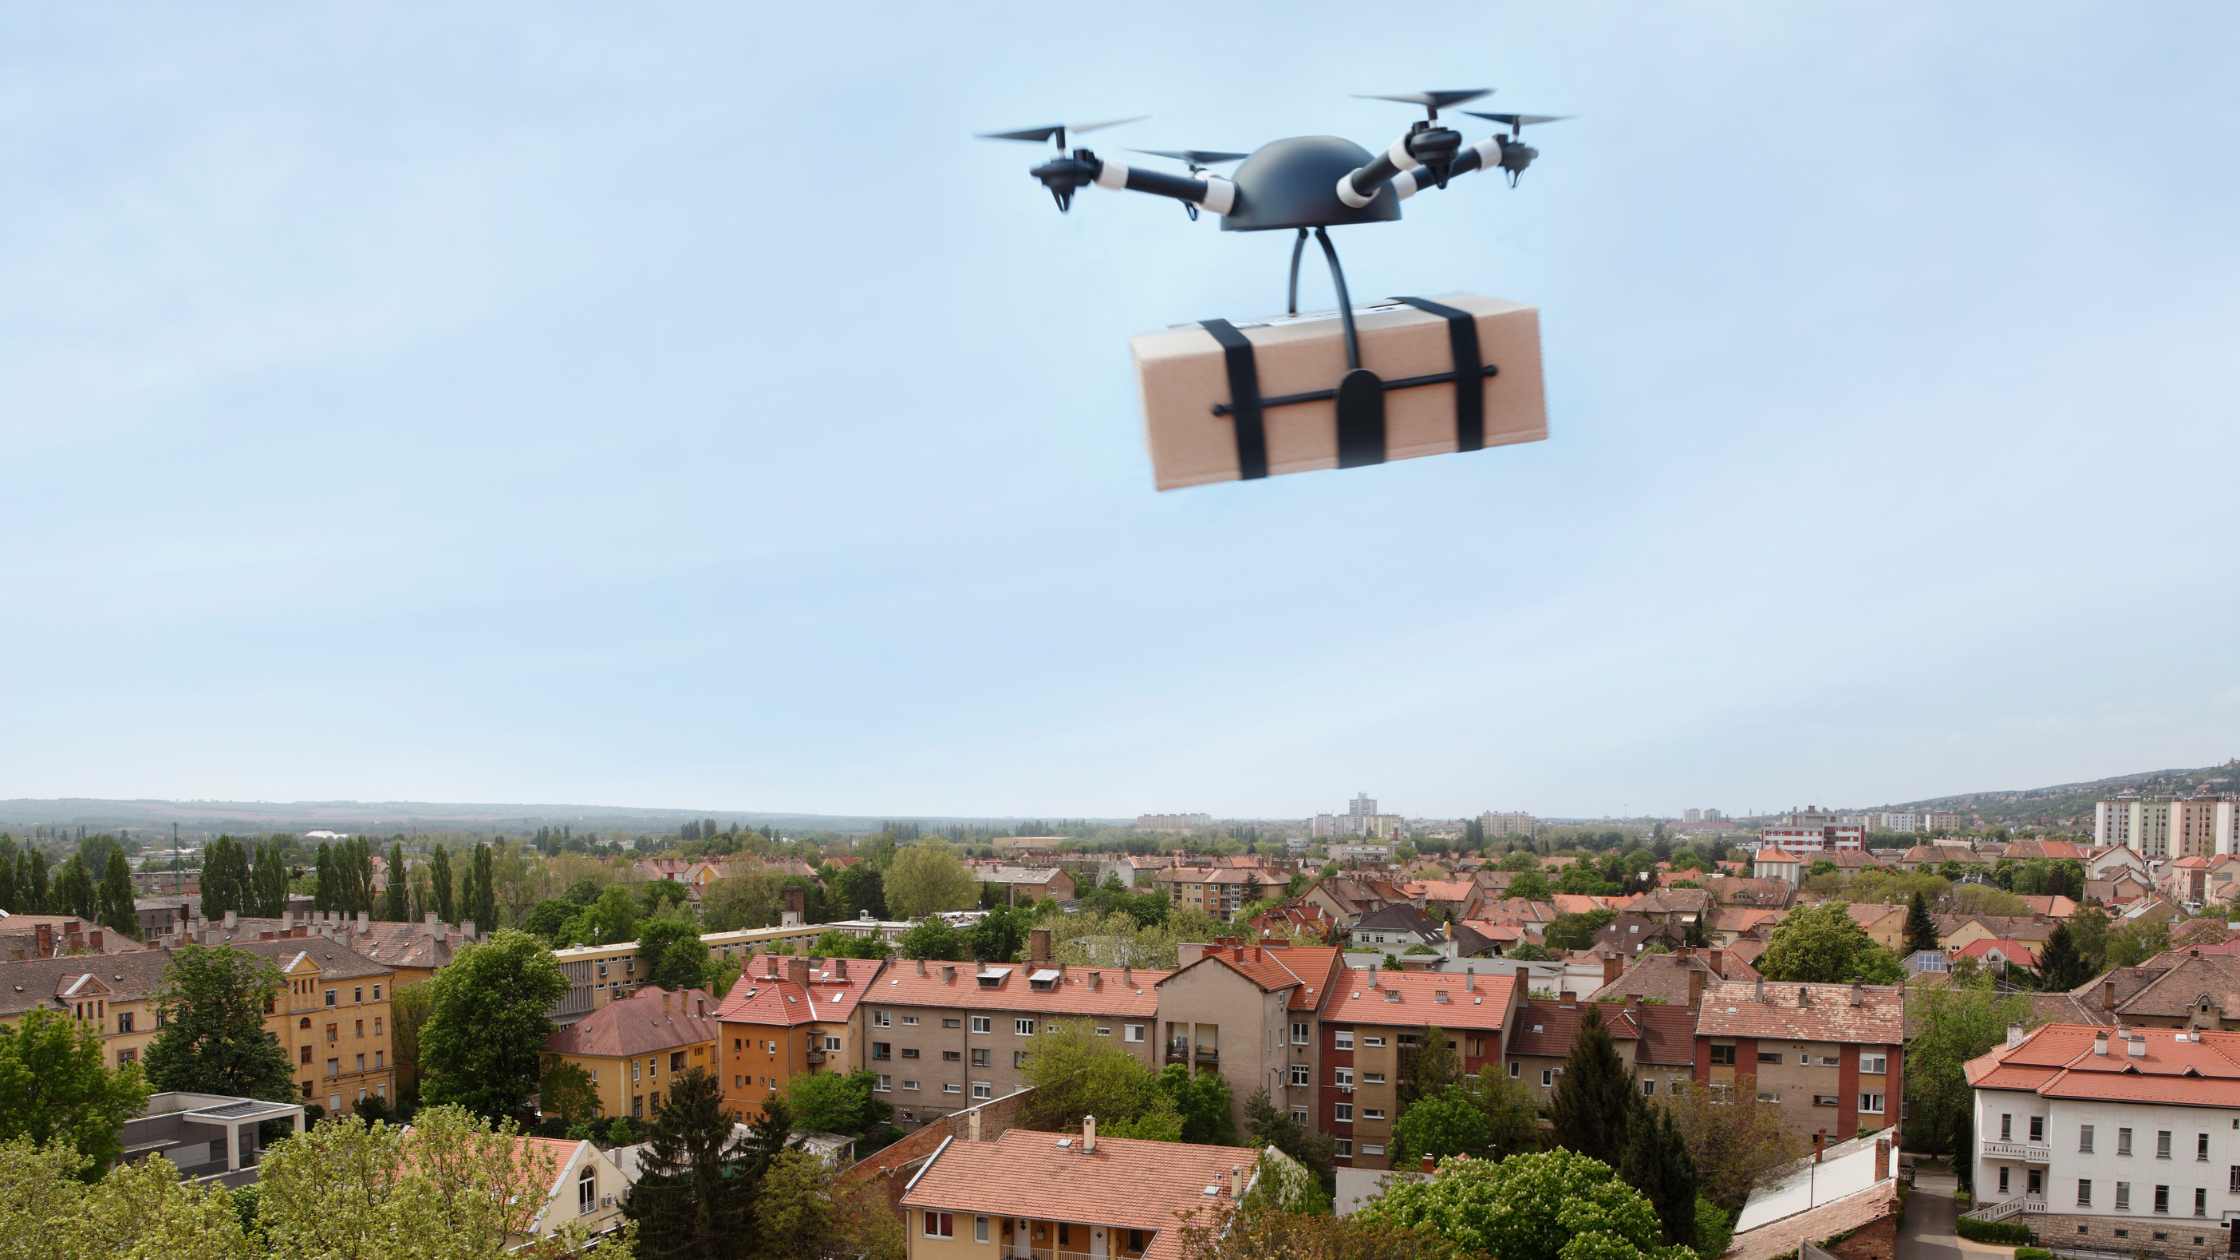 Amazon Drone Deliveries Finally Happening?